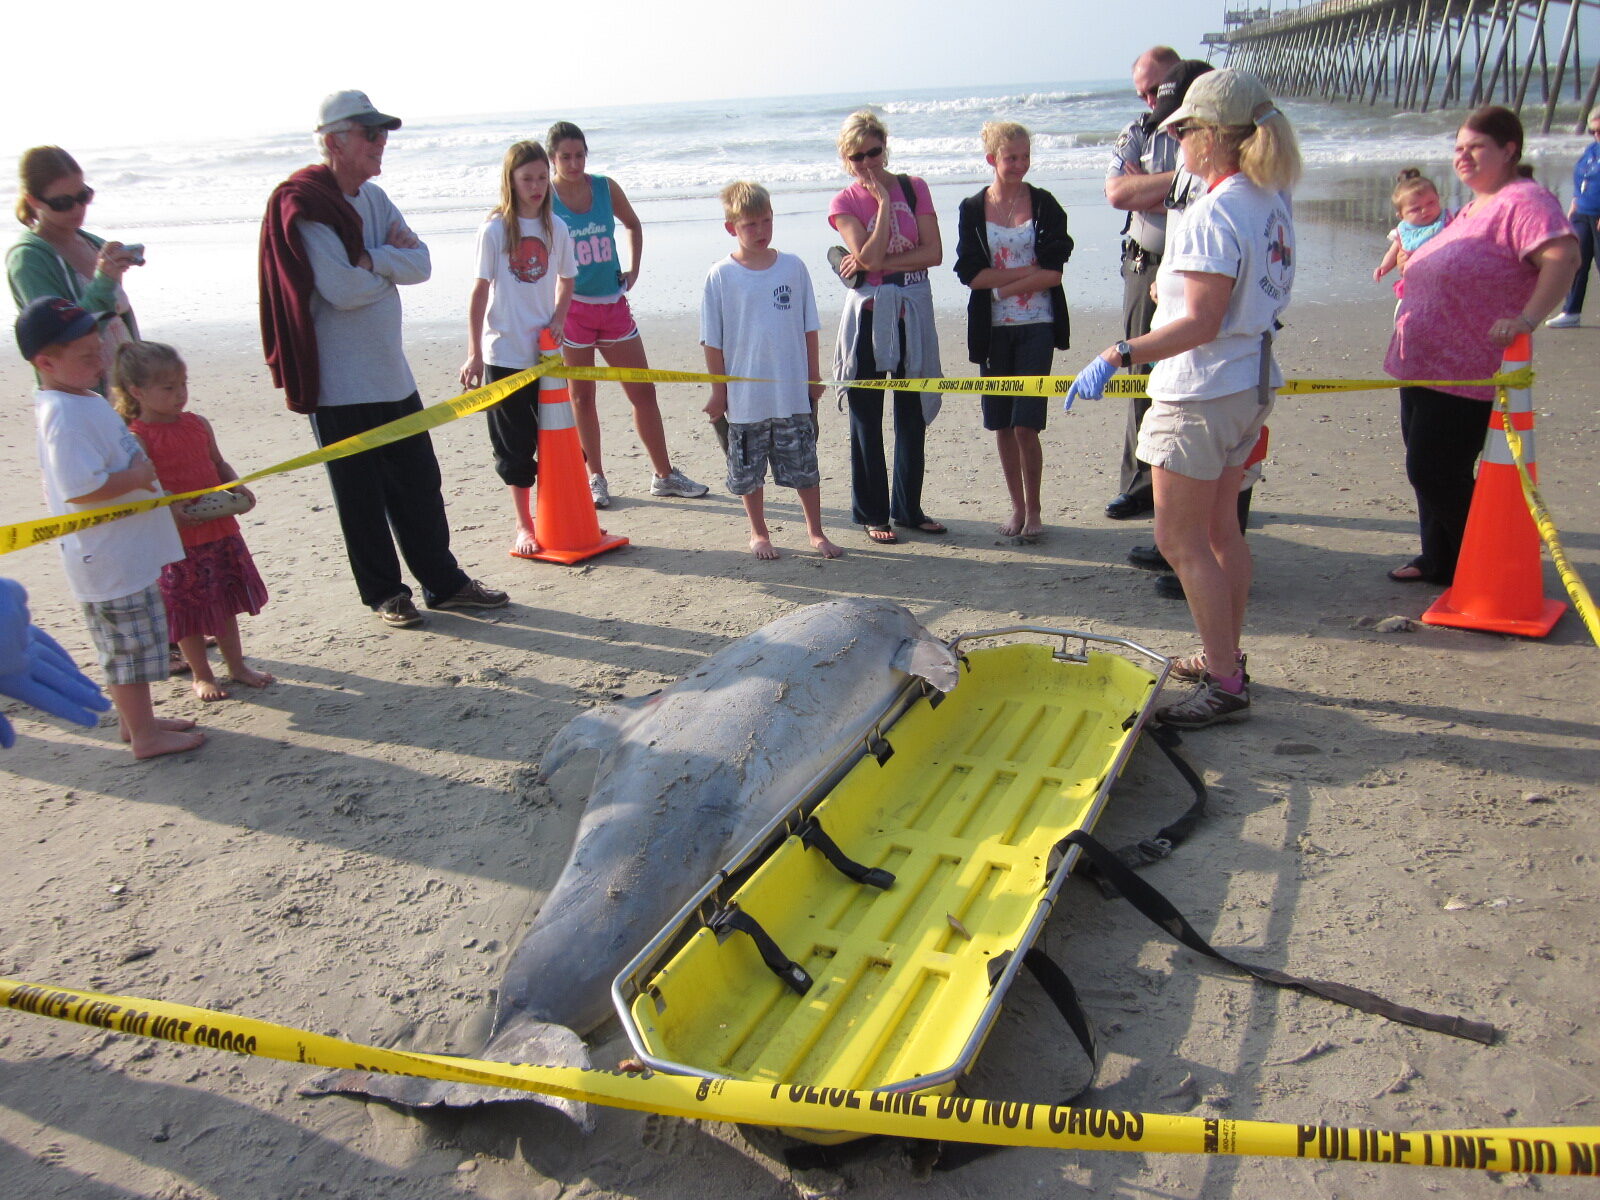 A teachable moment as our regional marine mammal stranding coordinator Vicky Thayer discusses a dead stranded dolphin to beachgoers by the Emerald Isle fishing pier on April 11, 2011.